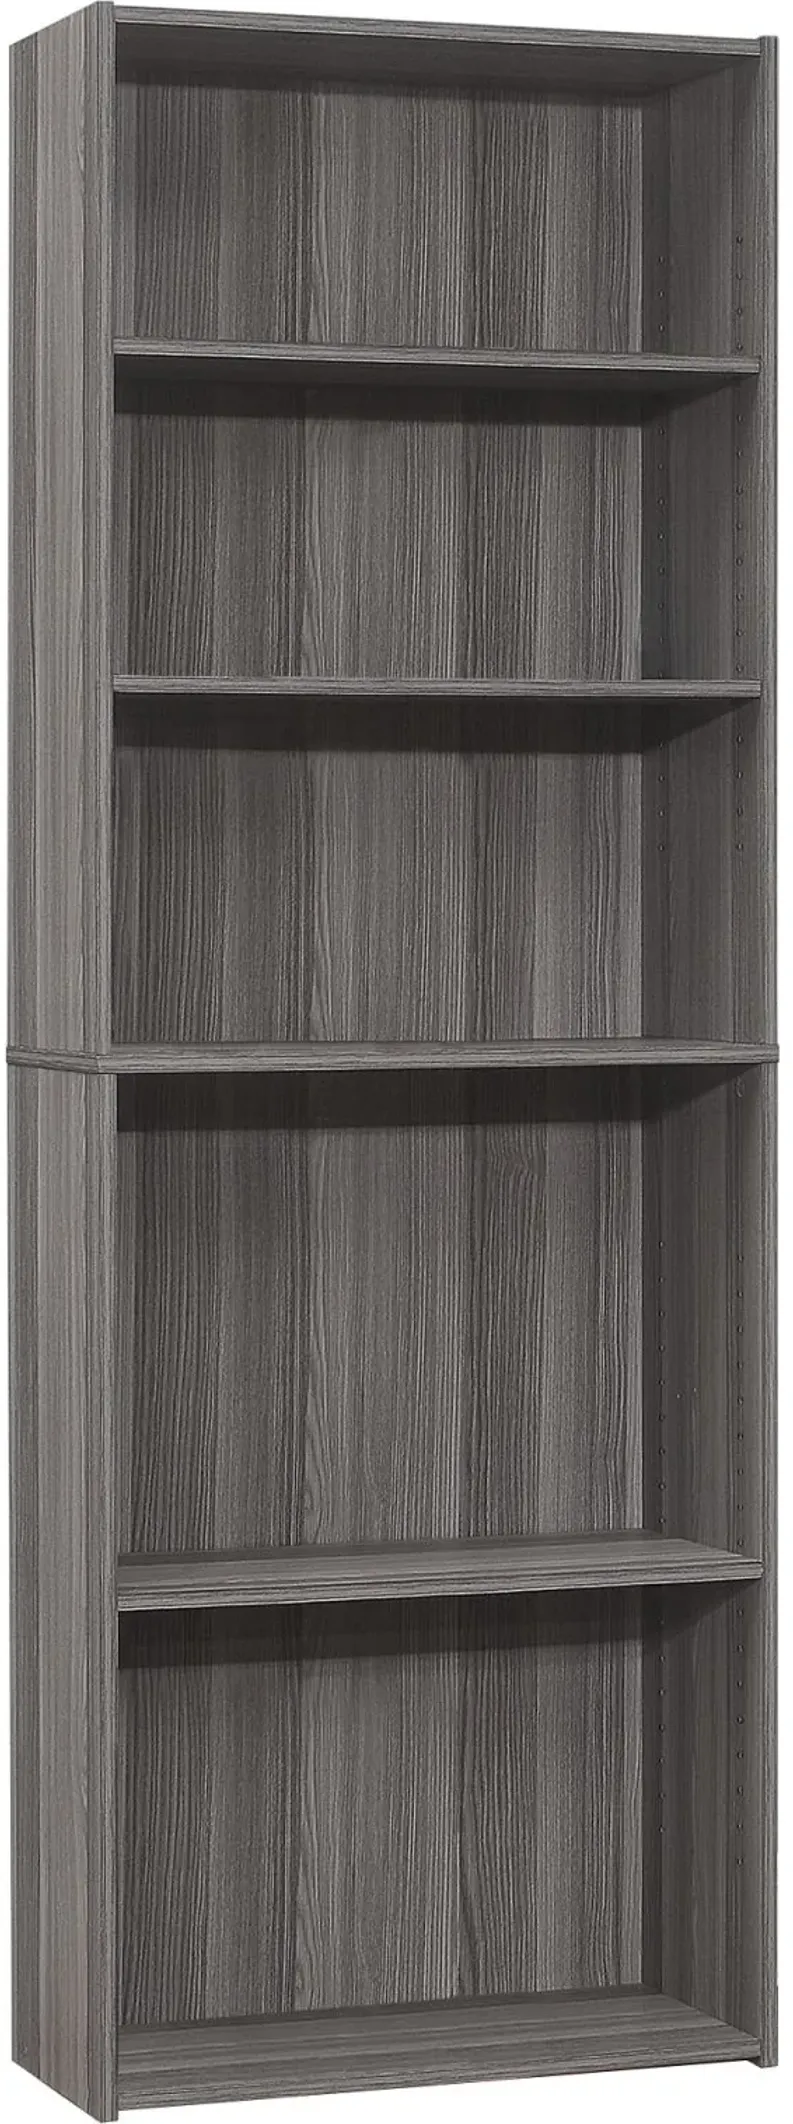 Bookcase - 72"H / Grey With 5 Shelves